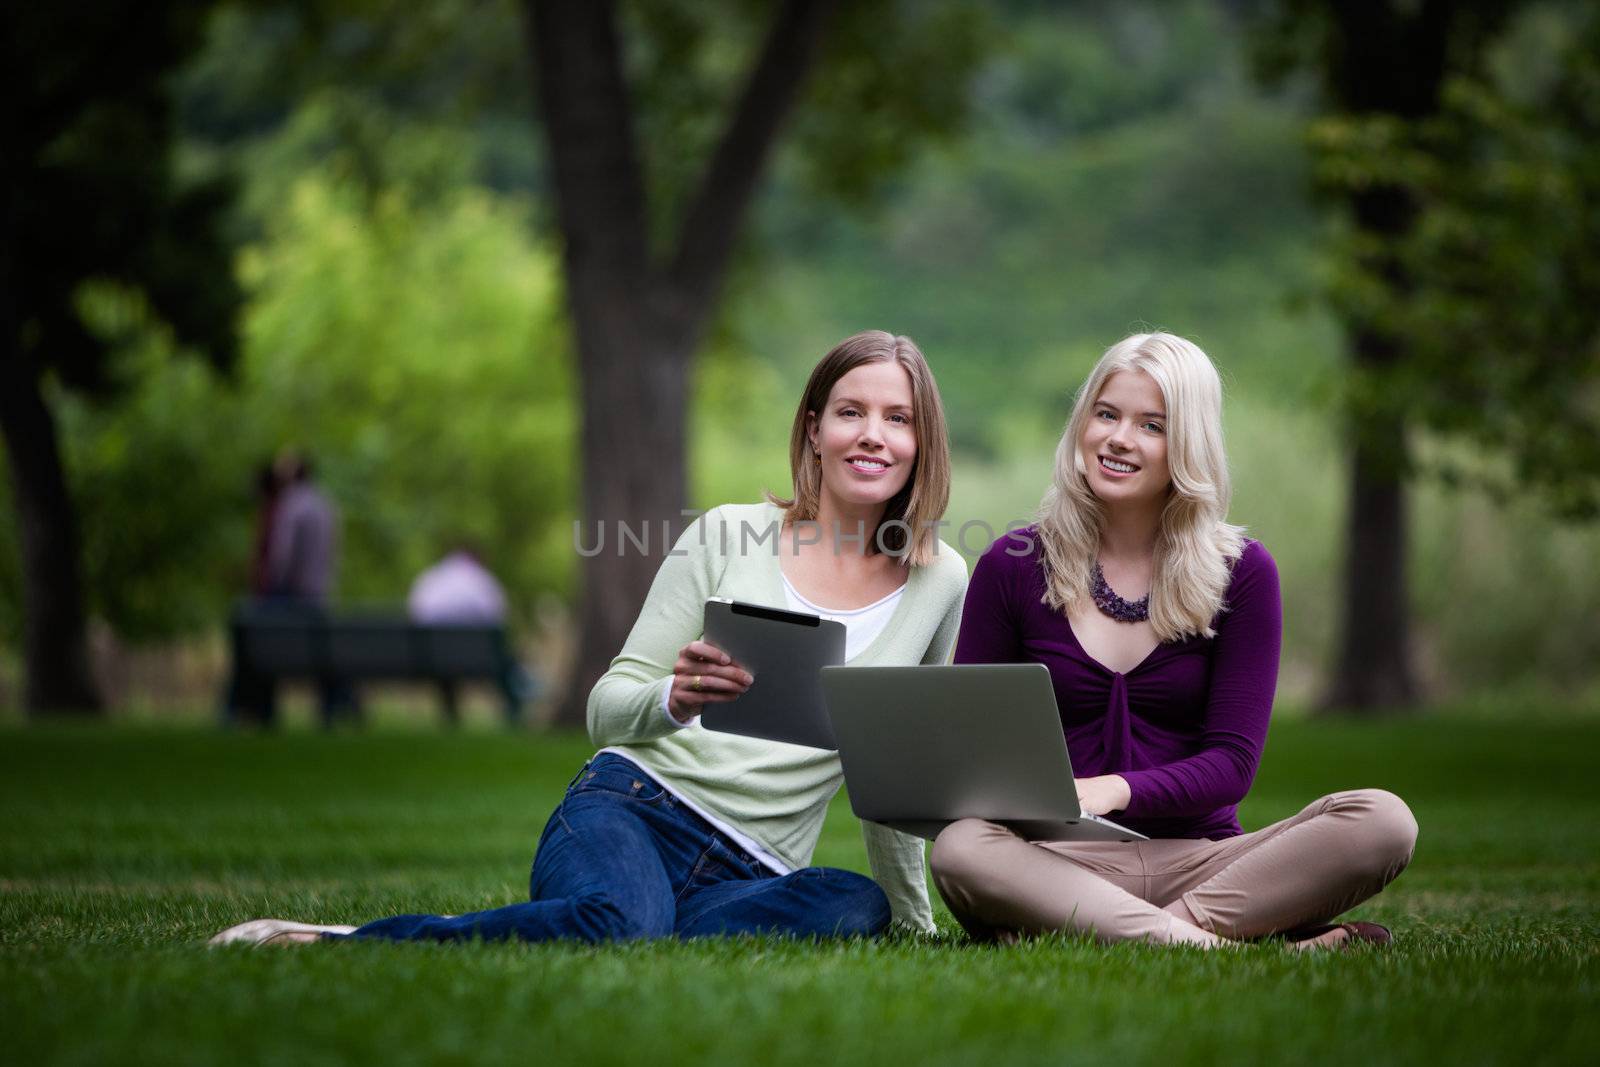 Smiling young women looknig at camera with computer and digital tablet in hand